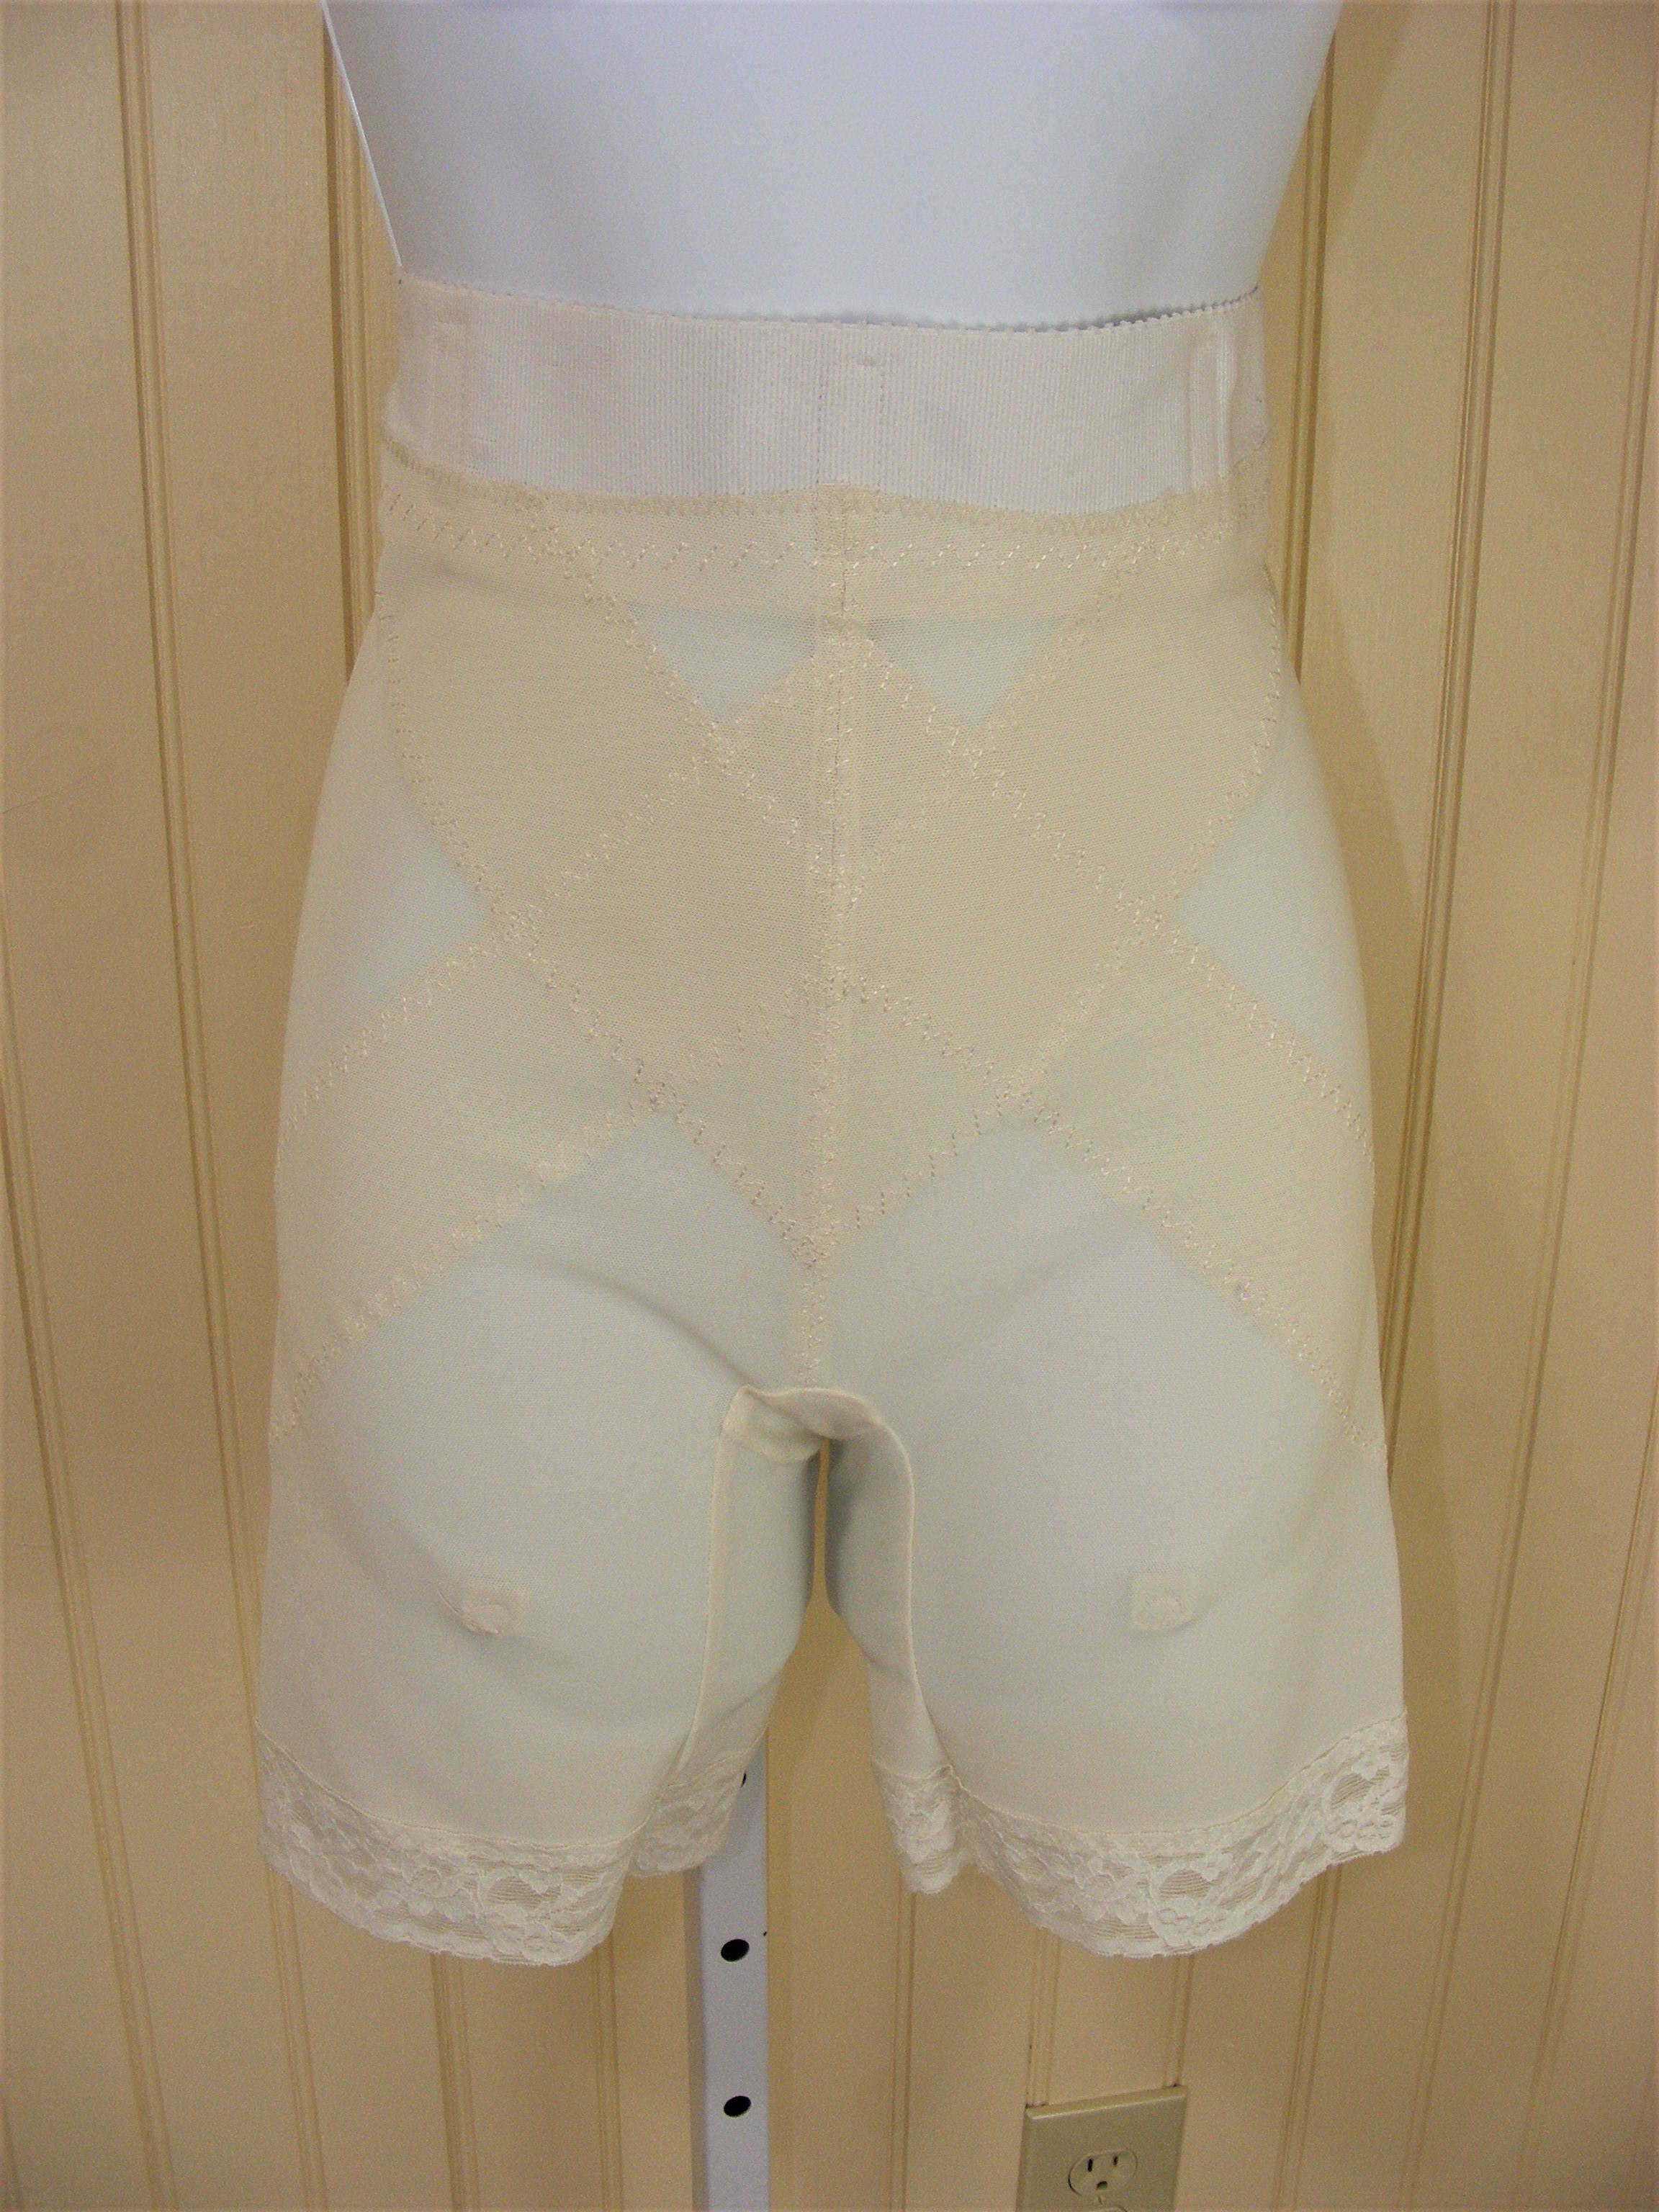 http://shopthrilling.com/cdn/shop/products/60-s-long-leg-girdle-corset-by-sears-by-sears-product-image__b7zp6a4s9.jpg?v=1624393472